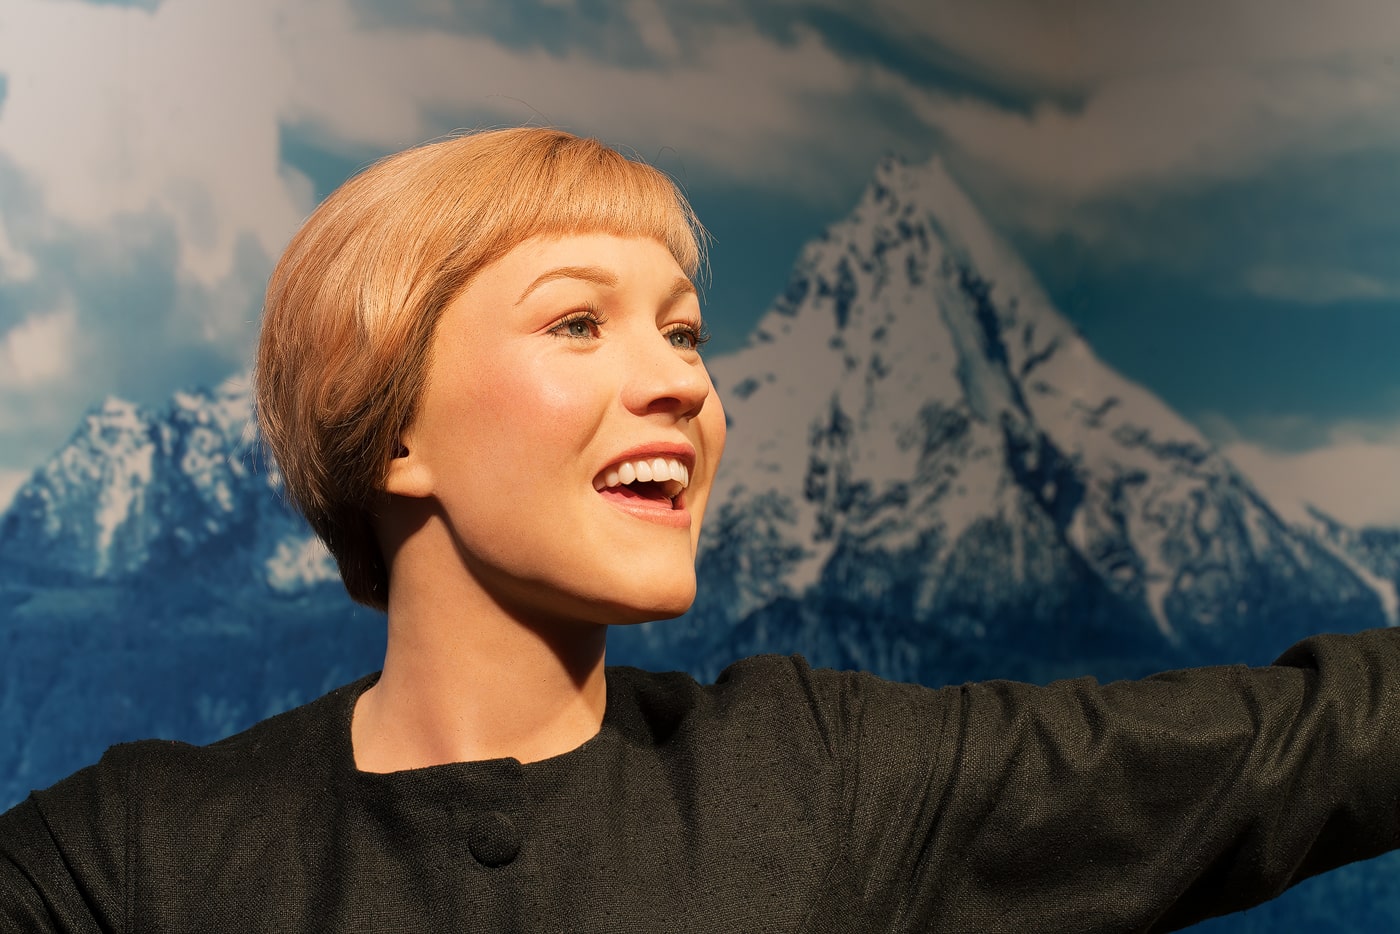 Meet Julie Andrews in her role as Maria von Trapp from the movie The Sound of Music